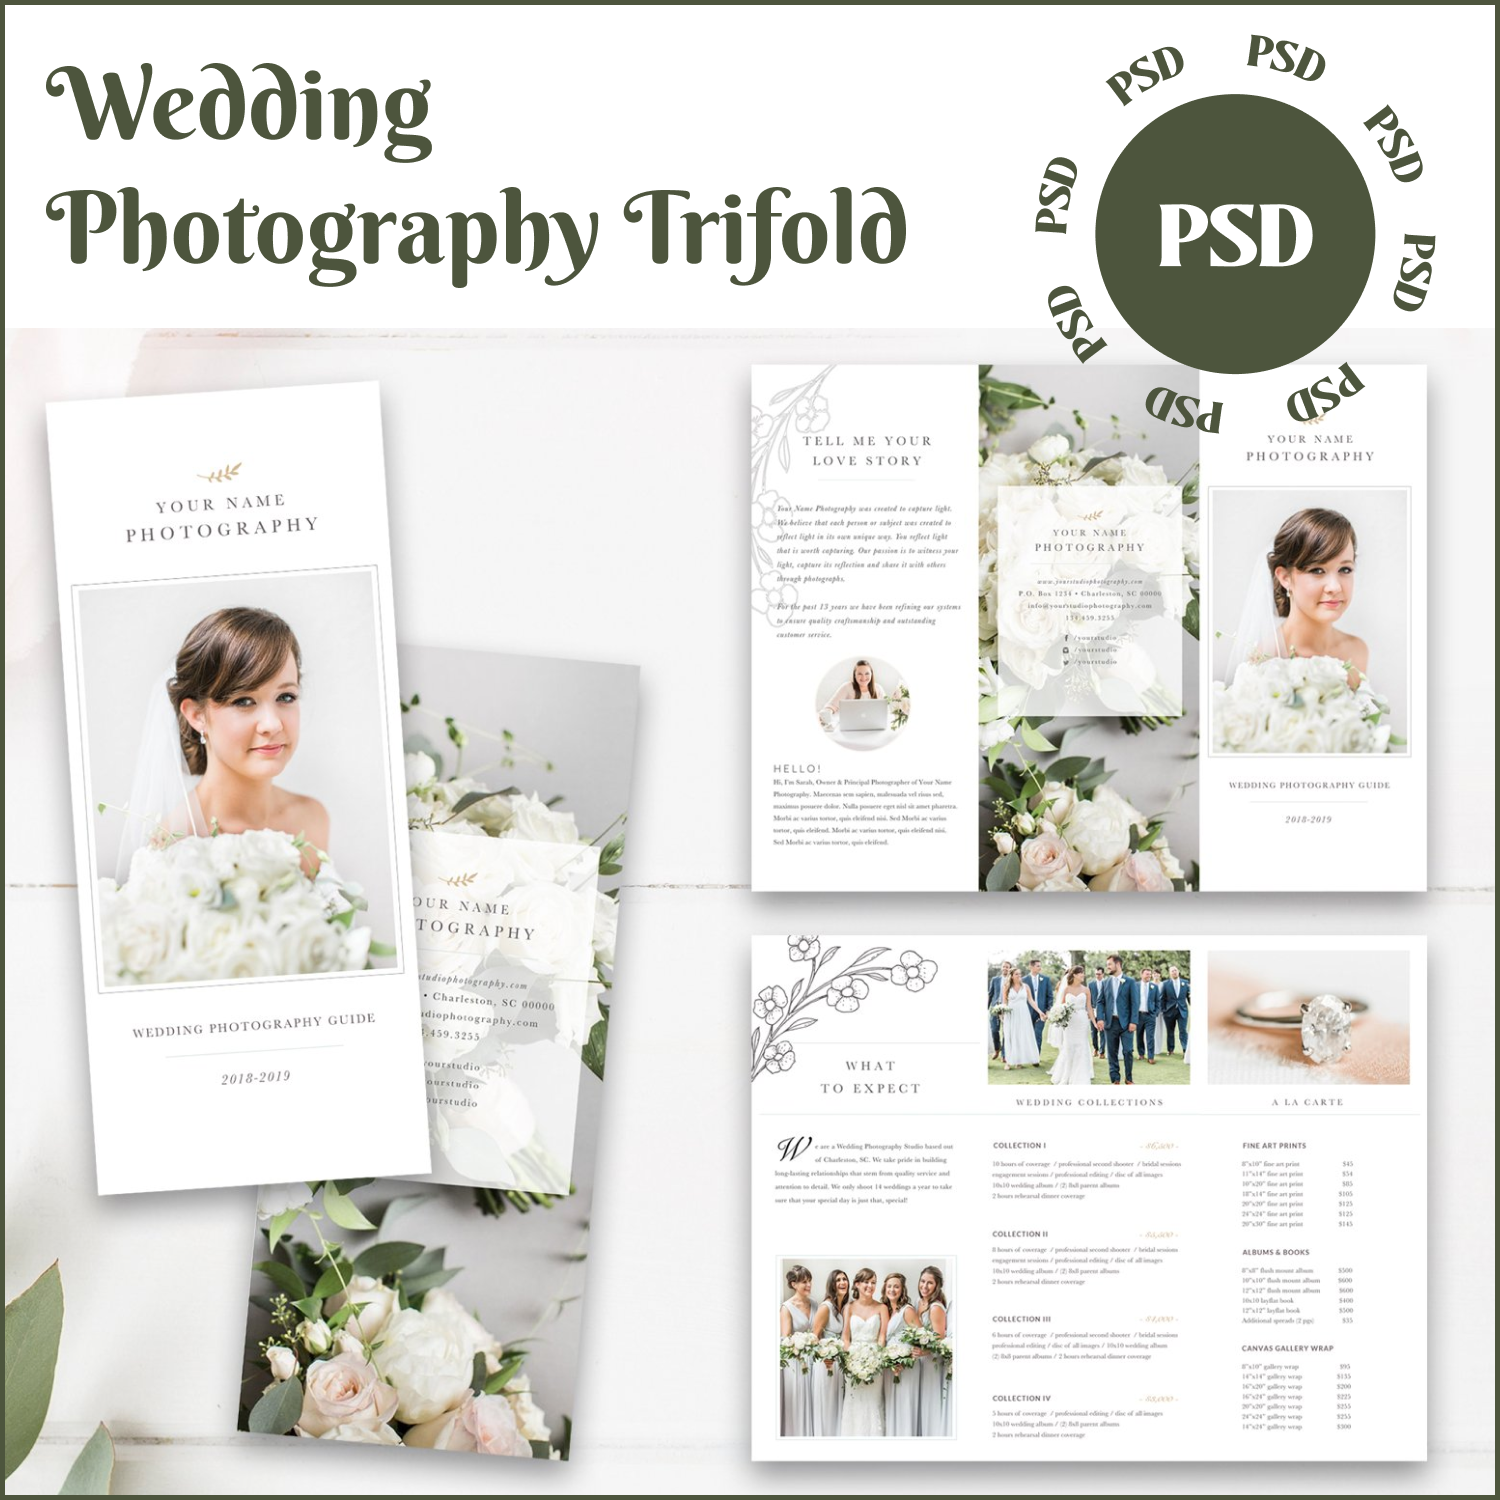 Preview wedding photography trifold.